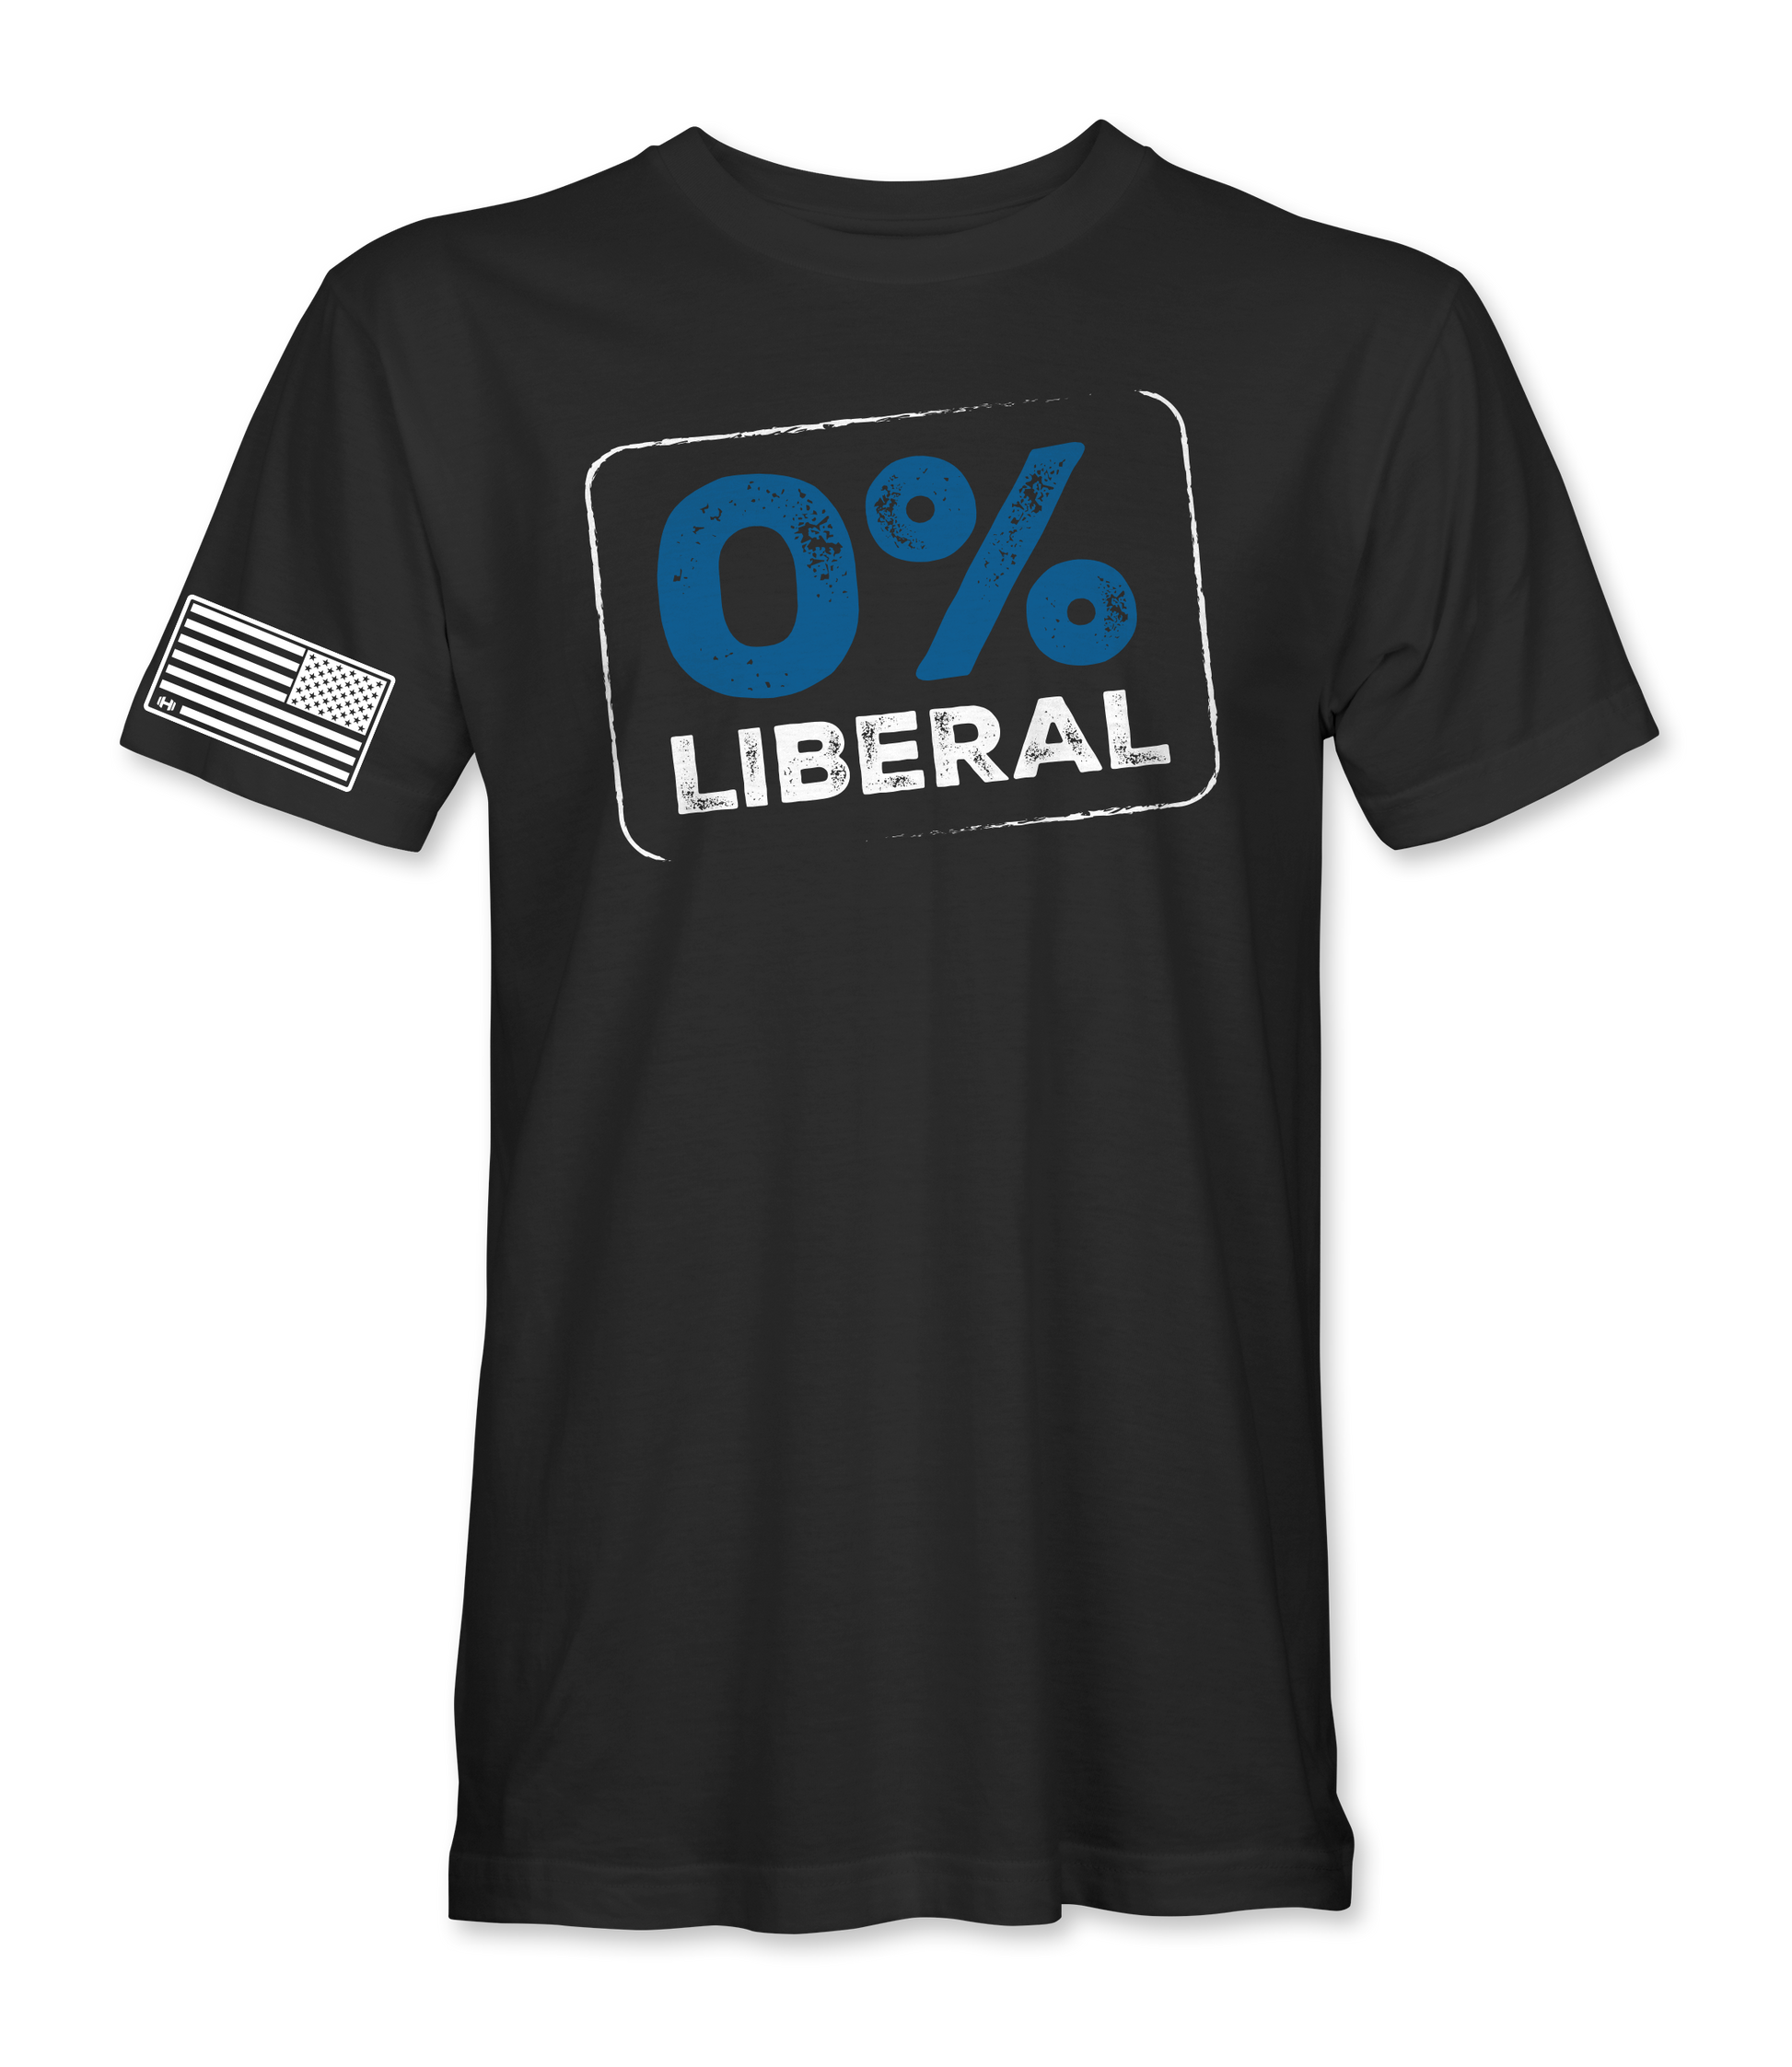 Picture of a black shirt with the image of 0% Liberal located on the front of the shirt and a flag on the right sleeve